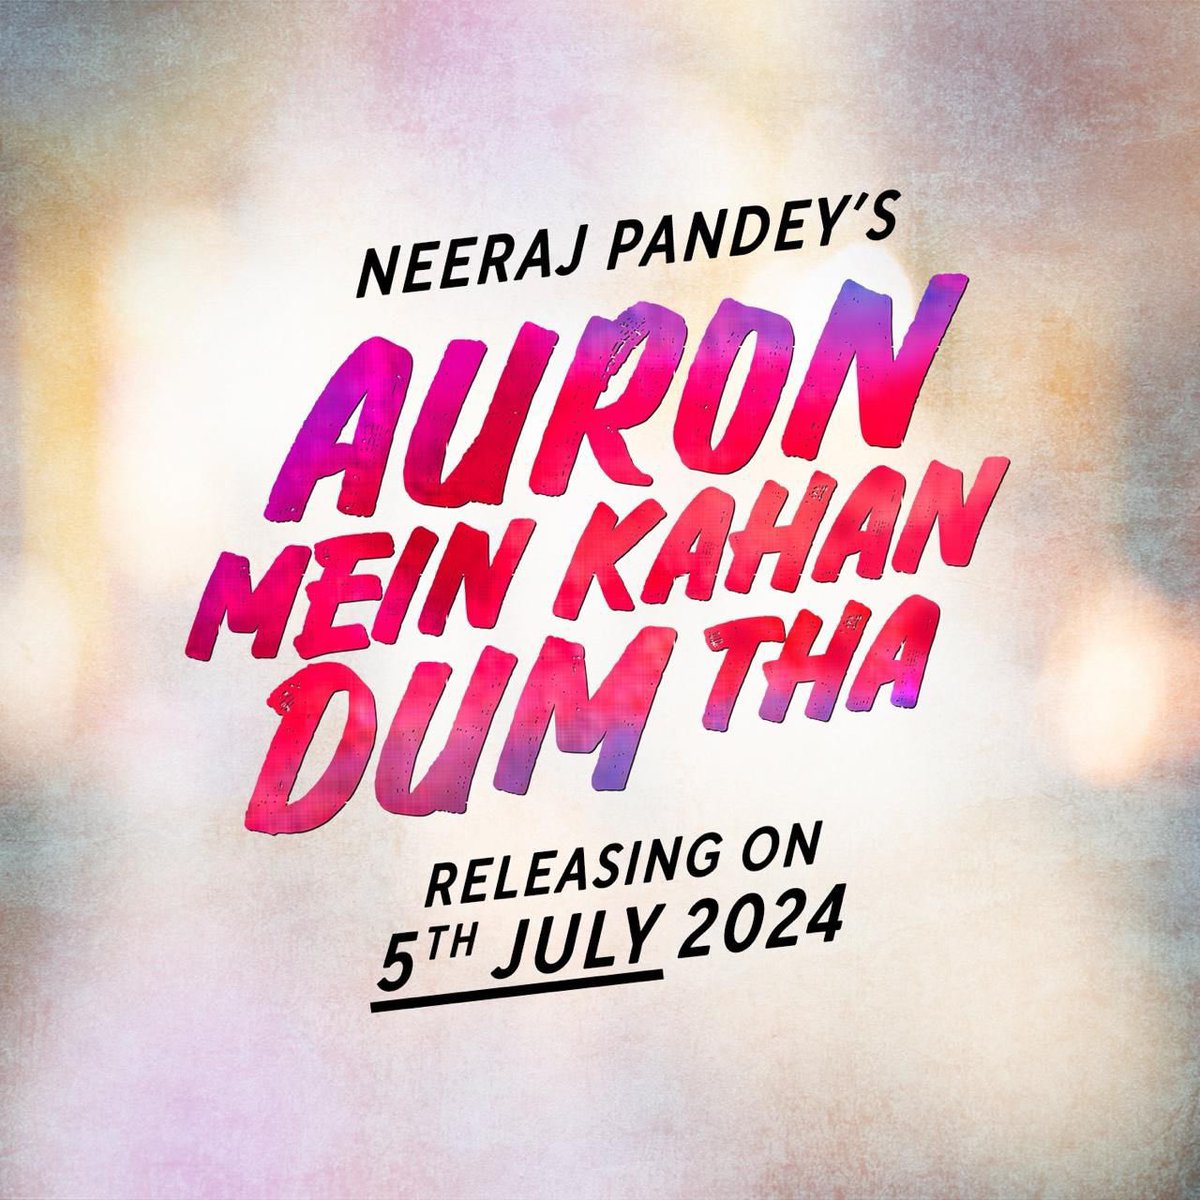 #AjayDevgn and #Tabu upcoming movie #AuronMeinKahanDumTha new release date announced.

It will hit the cinemas on 5th July 2024.

Also features #JimmySheirgill, #SaieeManjrekar and #ShantanuMaheshwari.

Looks like #SinghamAgain is confirmed not clashing with #Pushpa2.